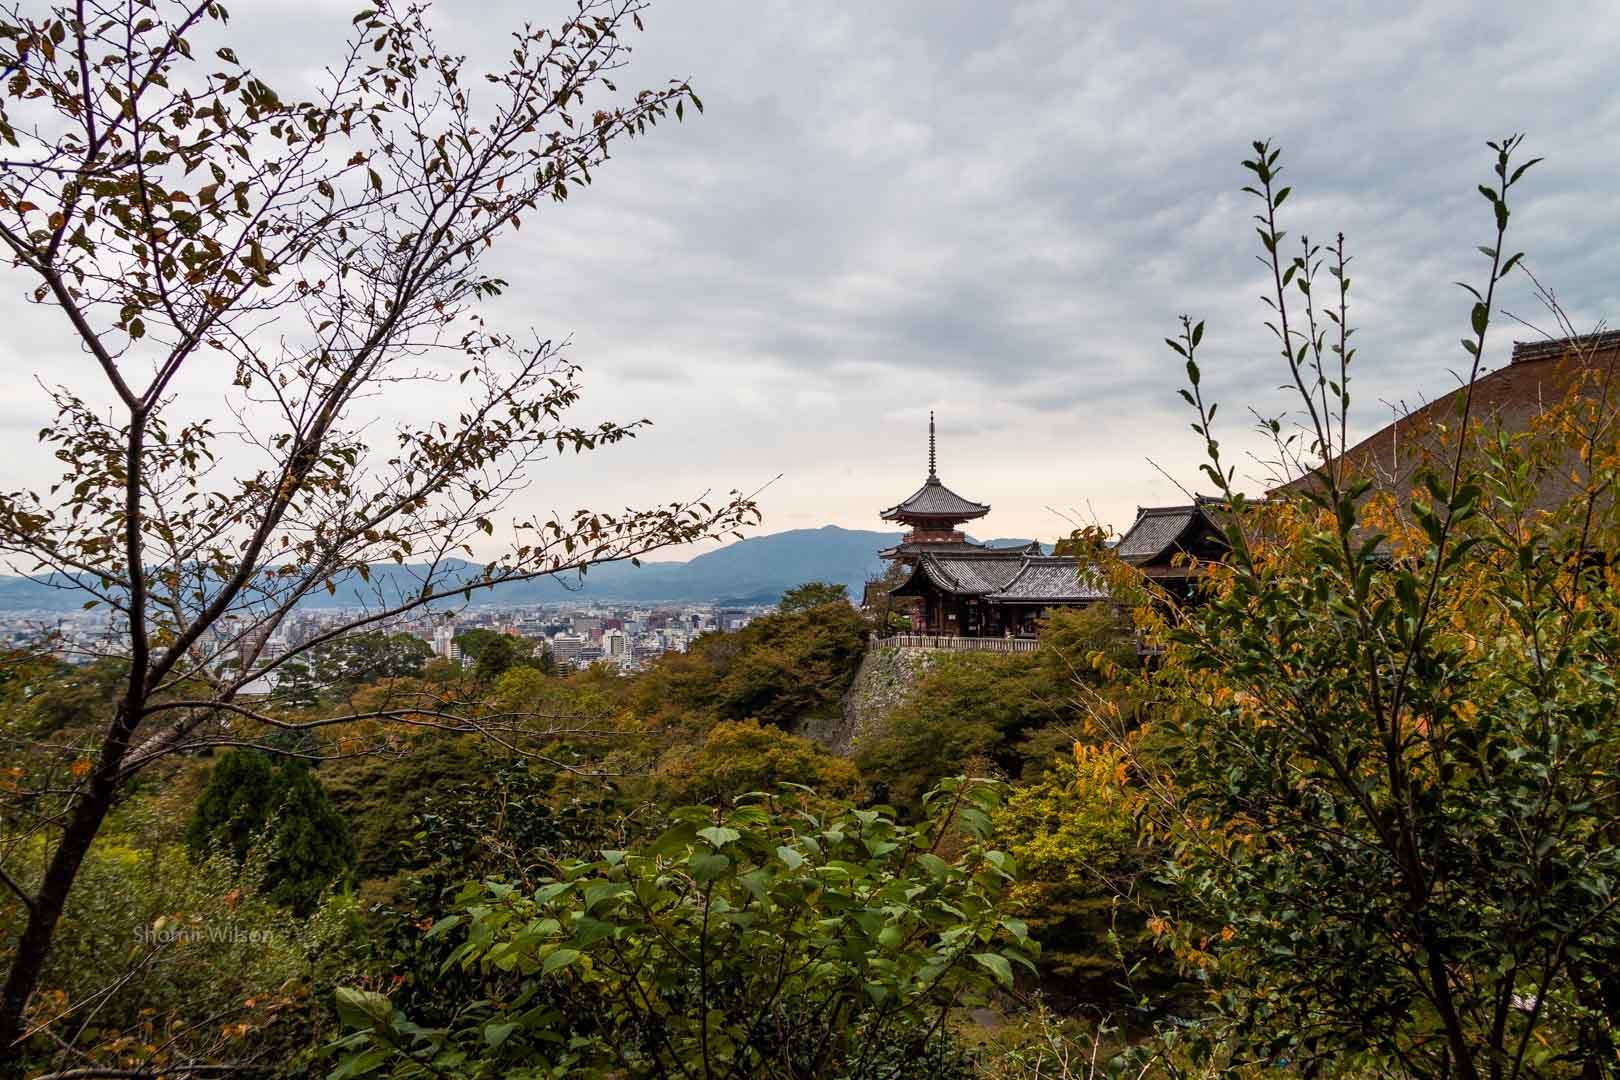 Buddhist temple on a hill from a nearby perspective with the view surrounded by bushes and trees; a city below and mountains in the distance